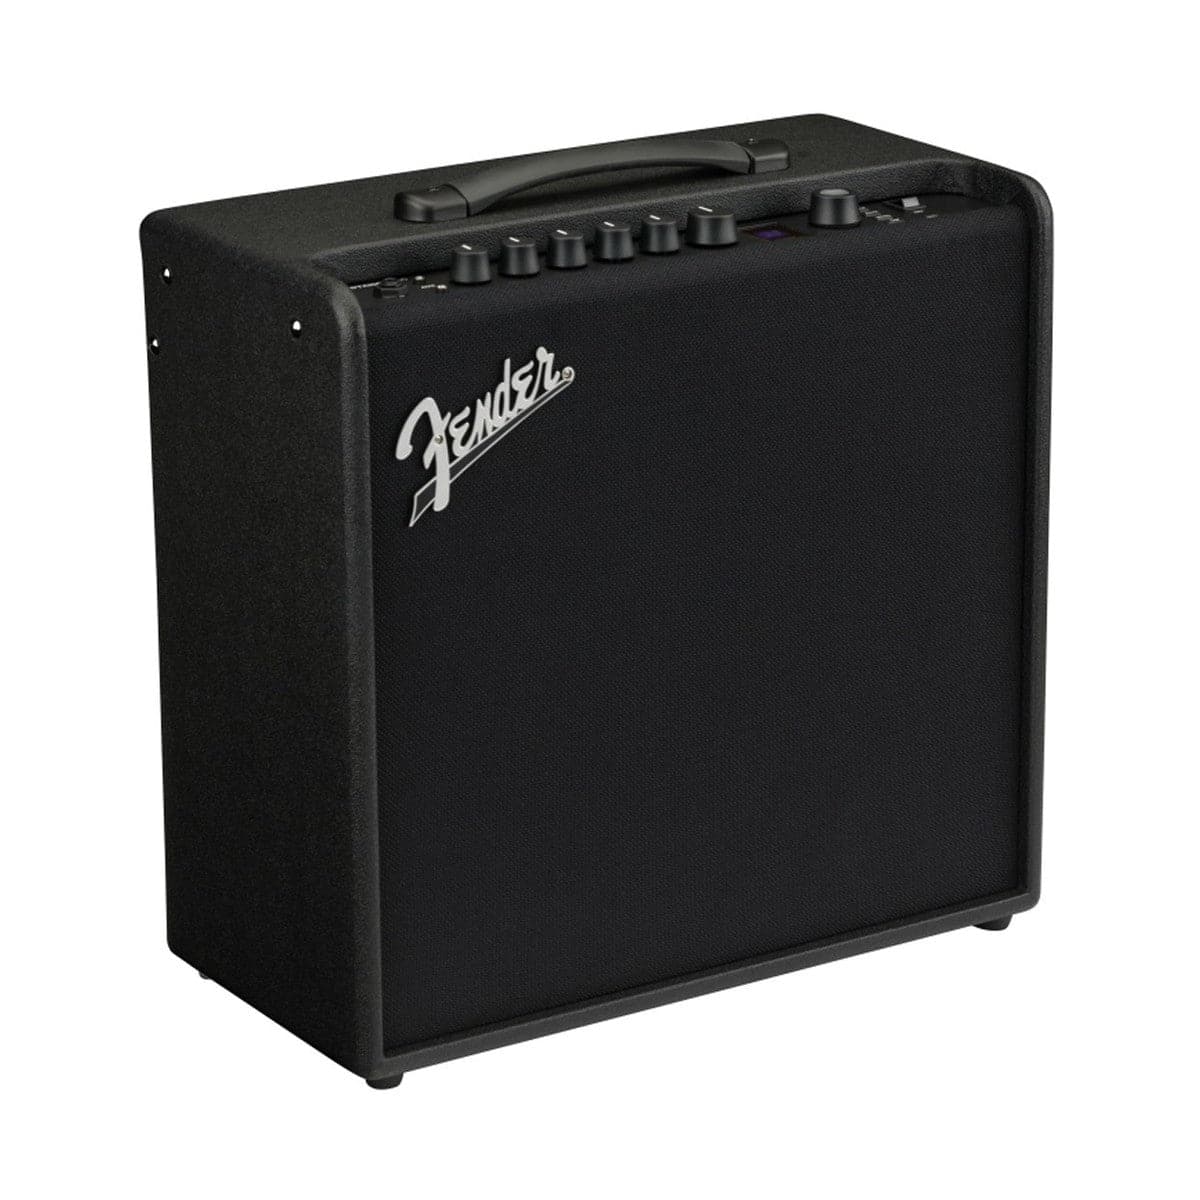 Fender Mustang LT50 50w Electric Guitar Amp with Effects